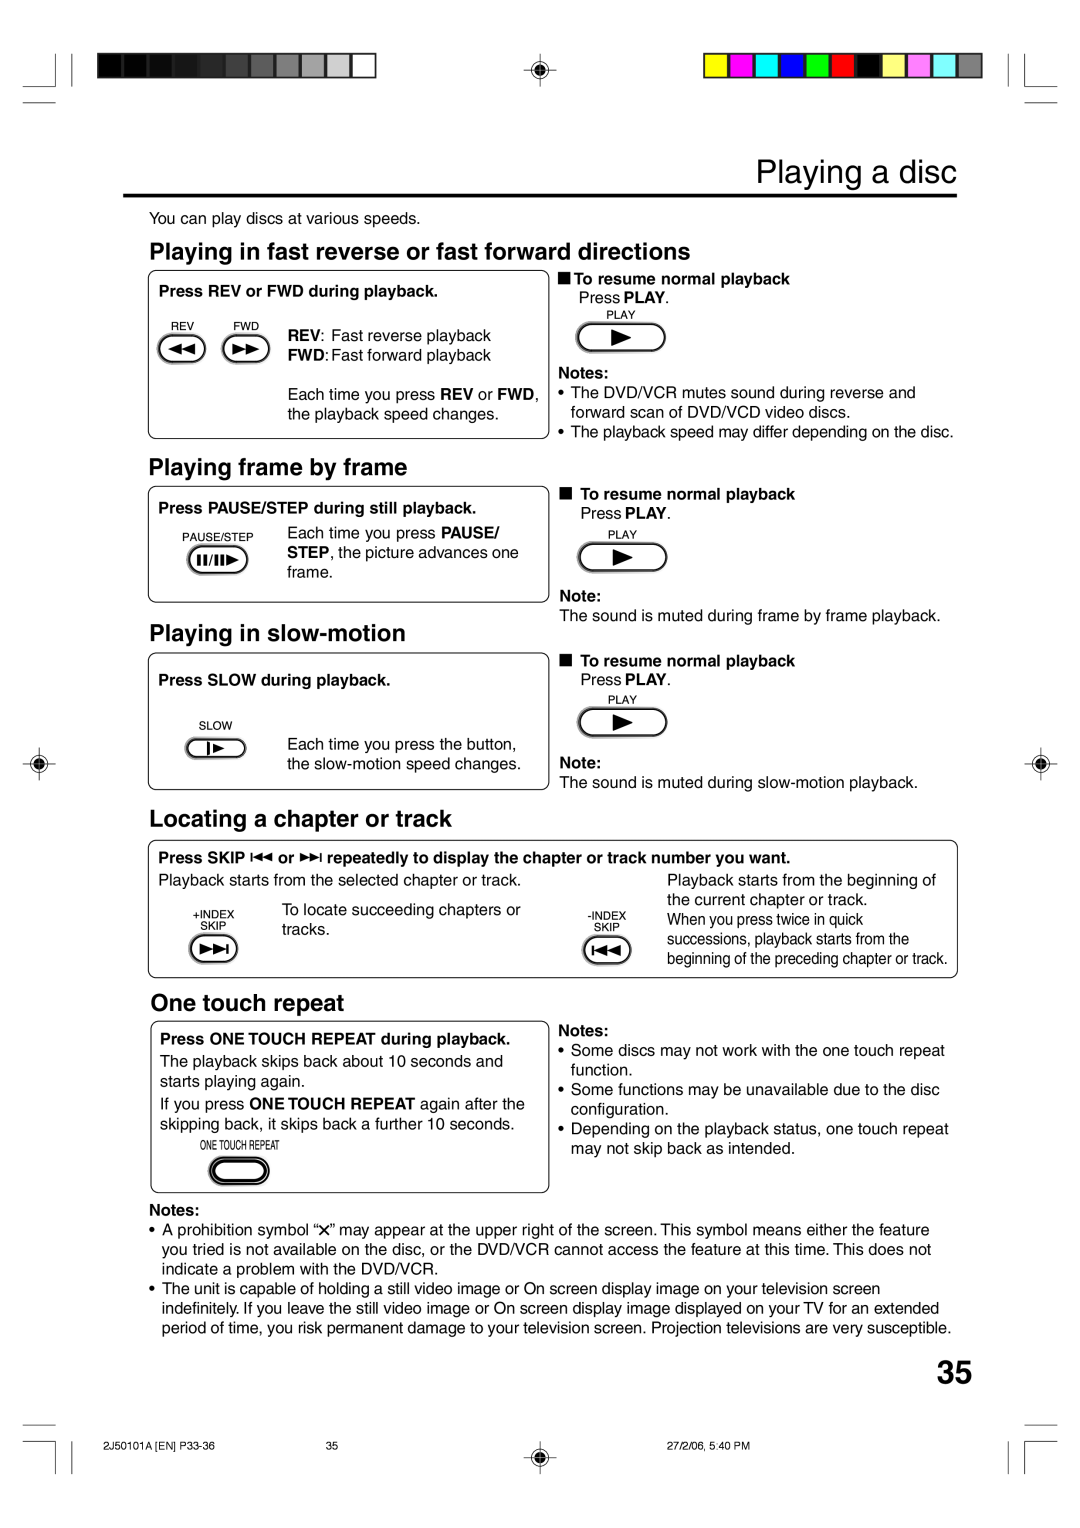 Toshiba SD-37VBSB manual Playing in fast reverse or fast forward directions, Playing frame by frame, Playing in slow-motion 